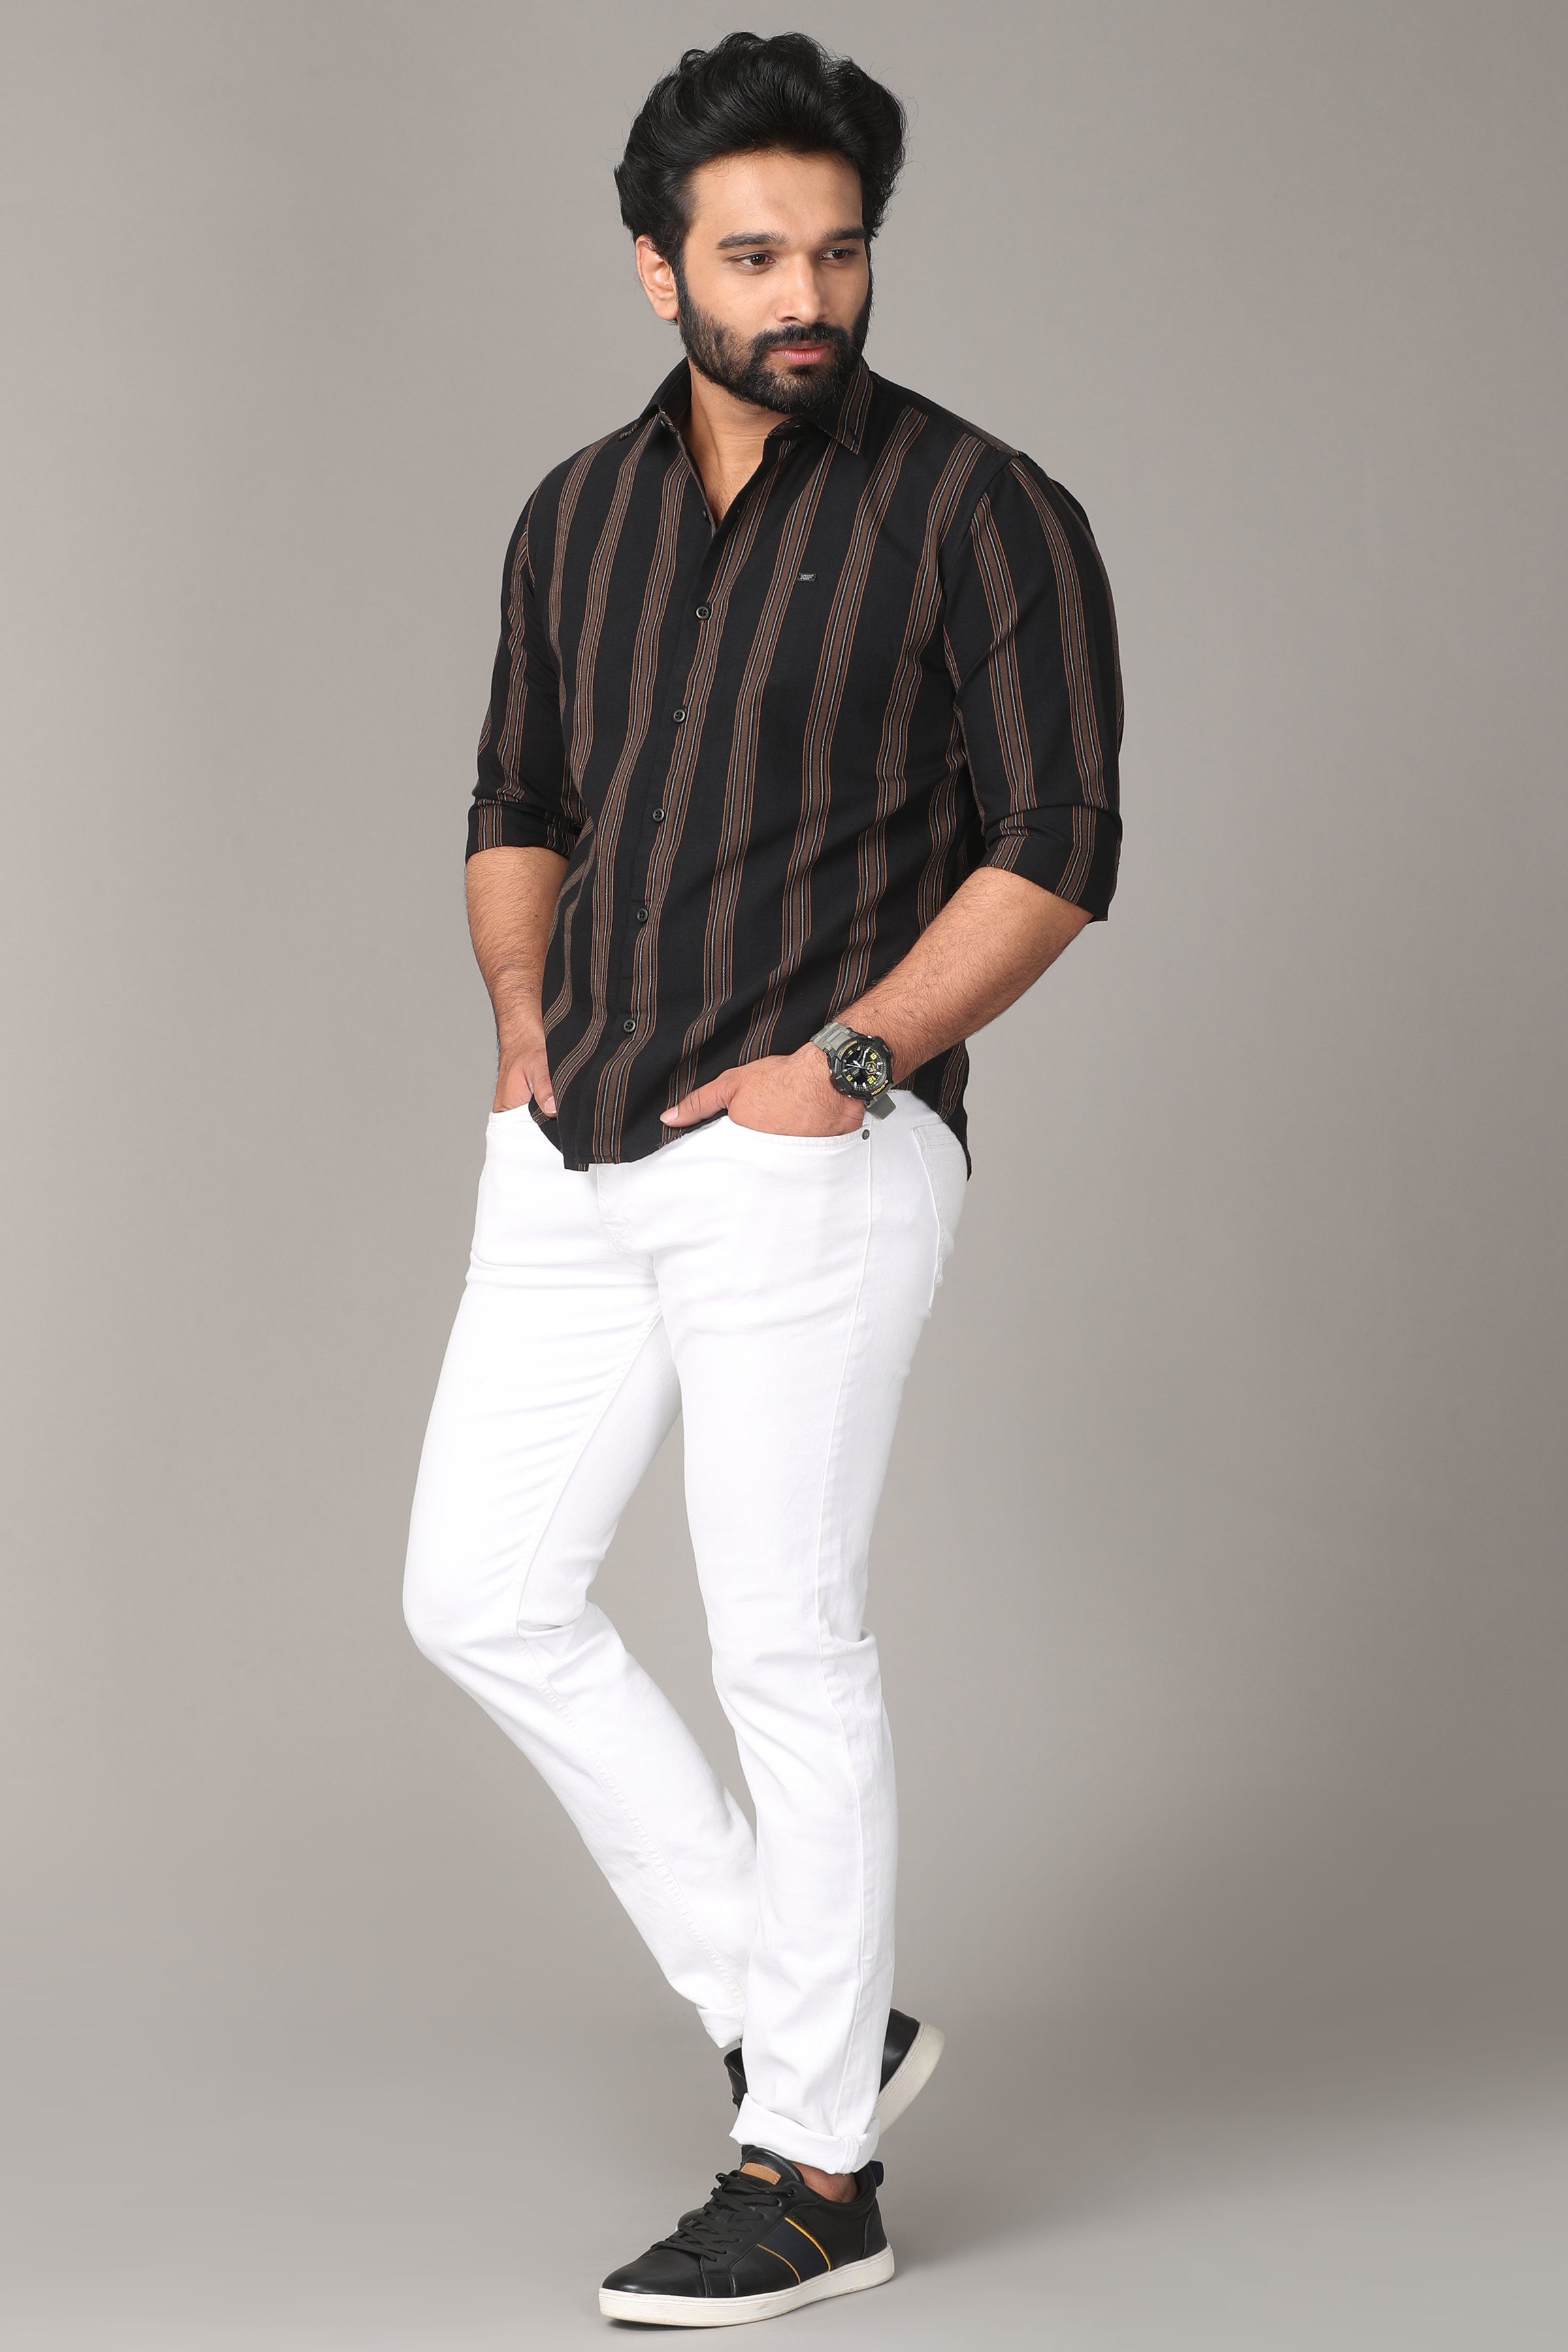 Black Full Sleeve Shirt with Brown Stripes Shirts KEF 